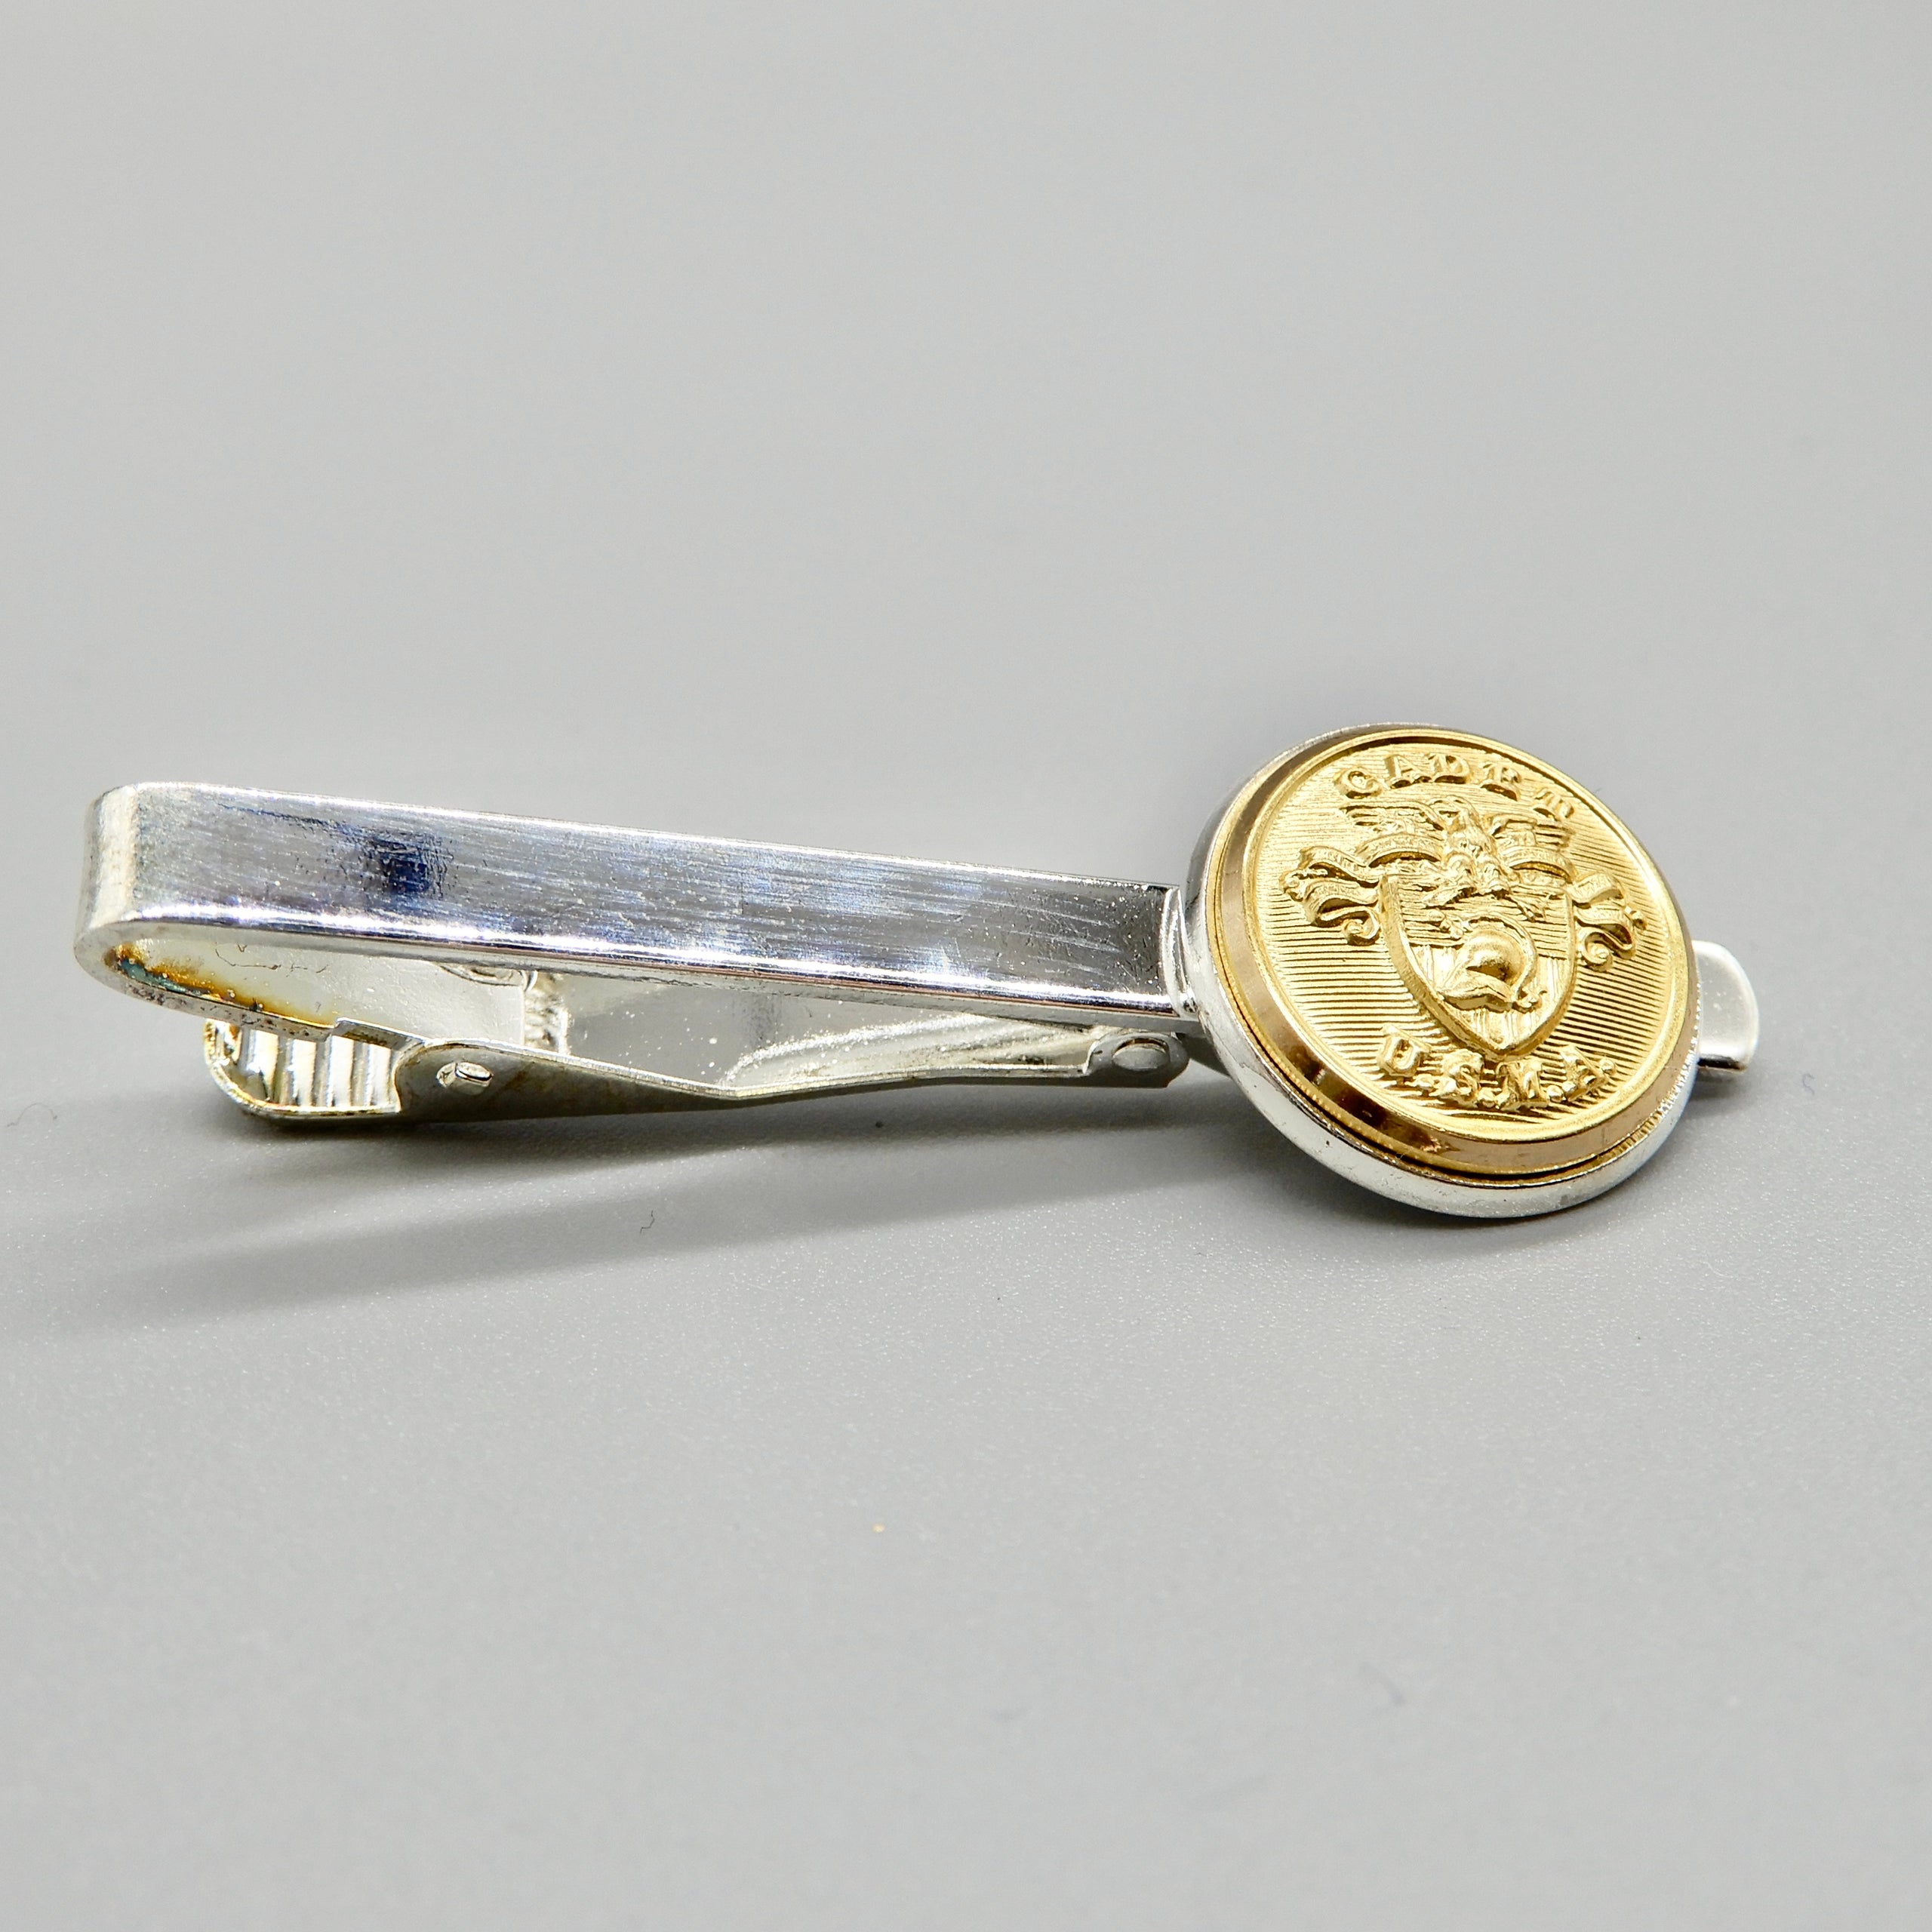 Silver Tie Bar - ONLINE ONLY: Virginia Military Institute